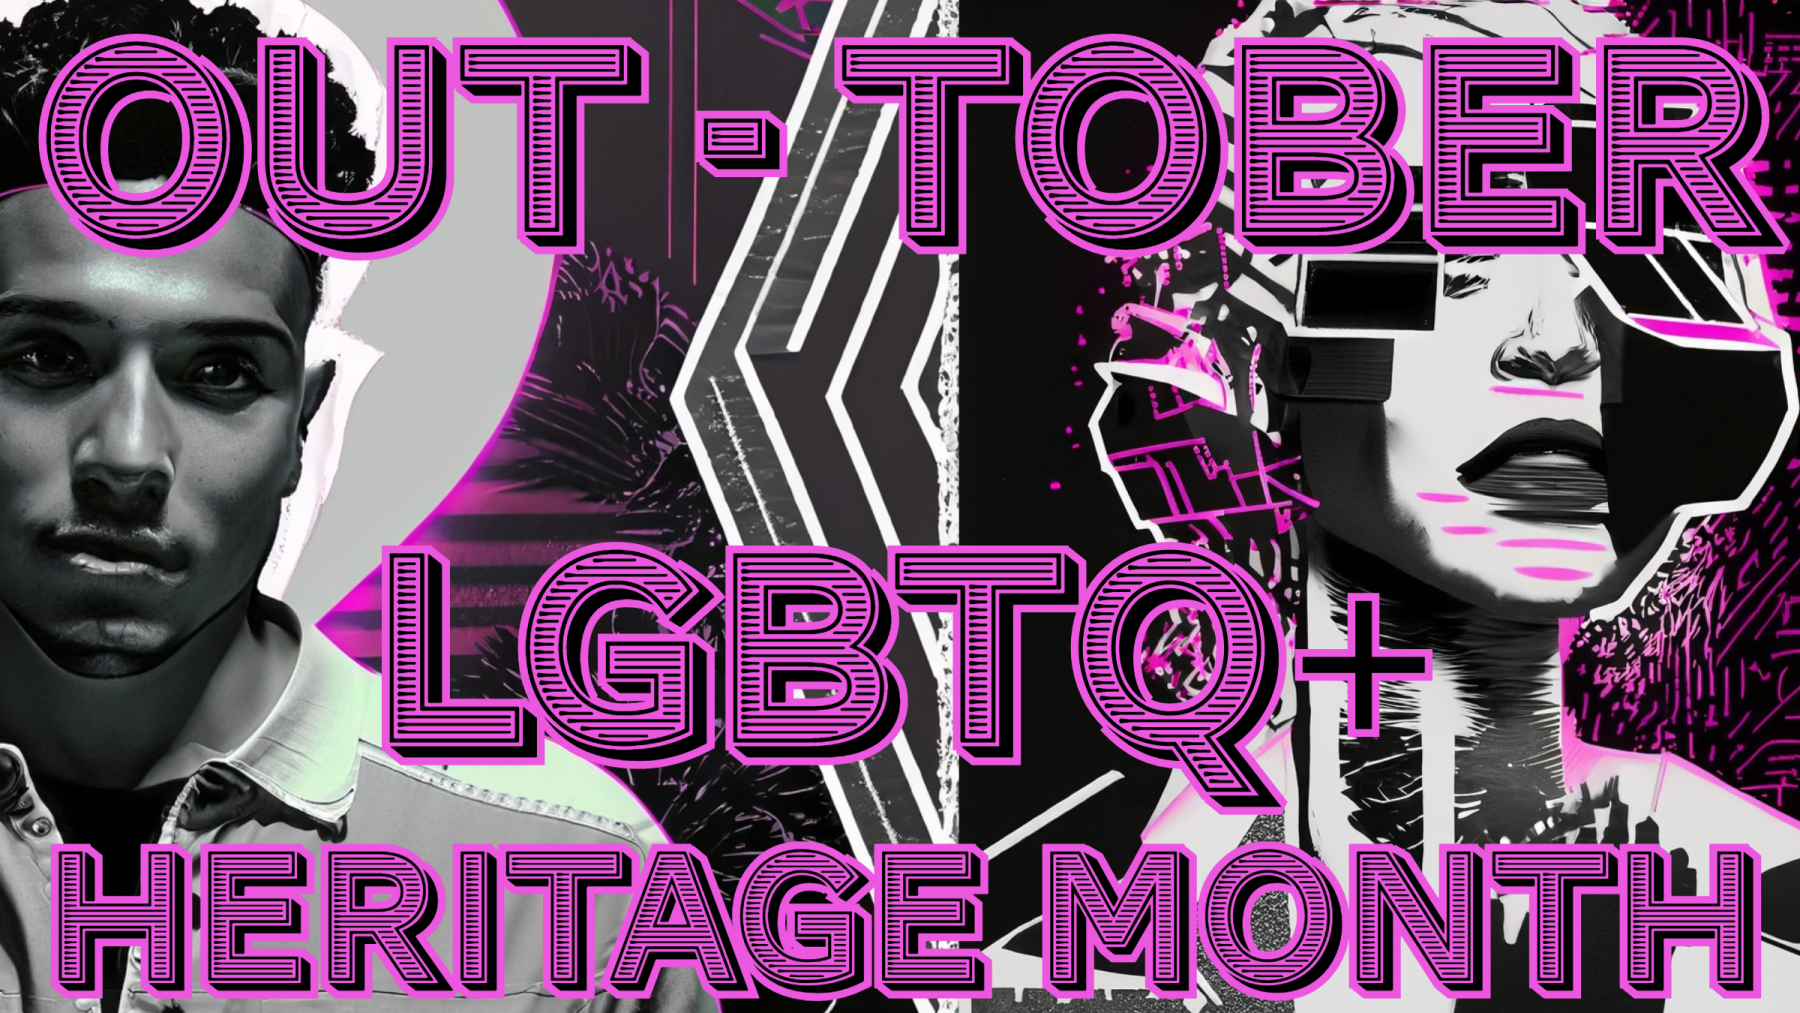 Out-tober LGBT+ Heritage Month banner in a pink & black punk rock theme